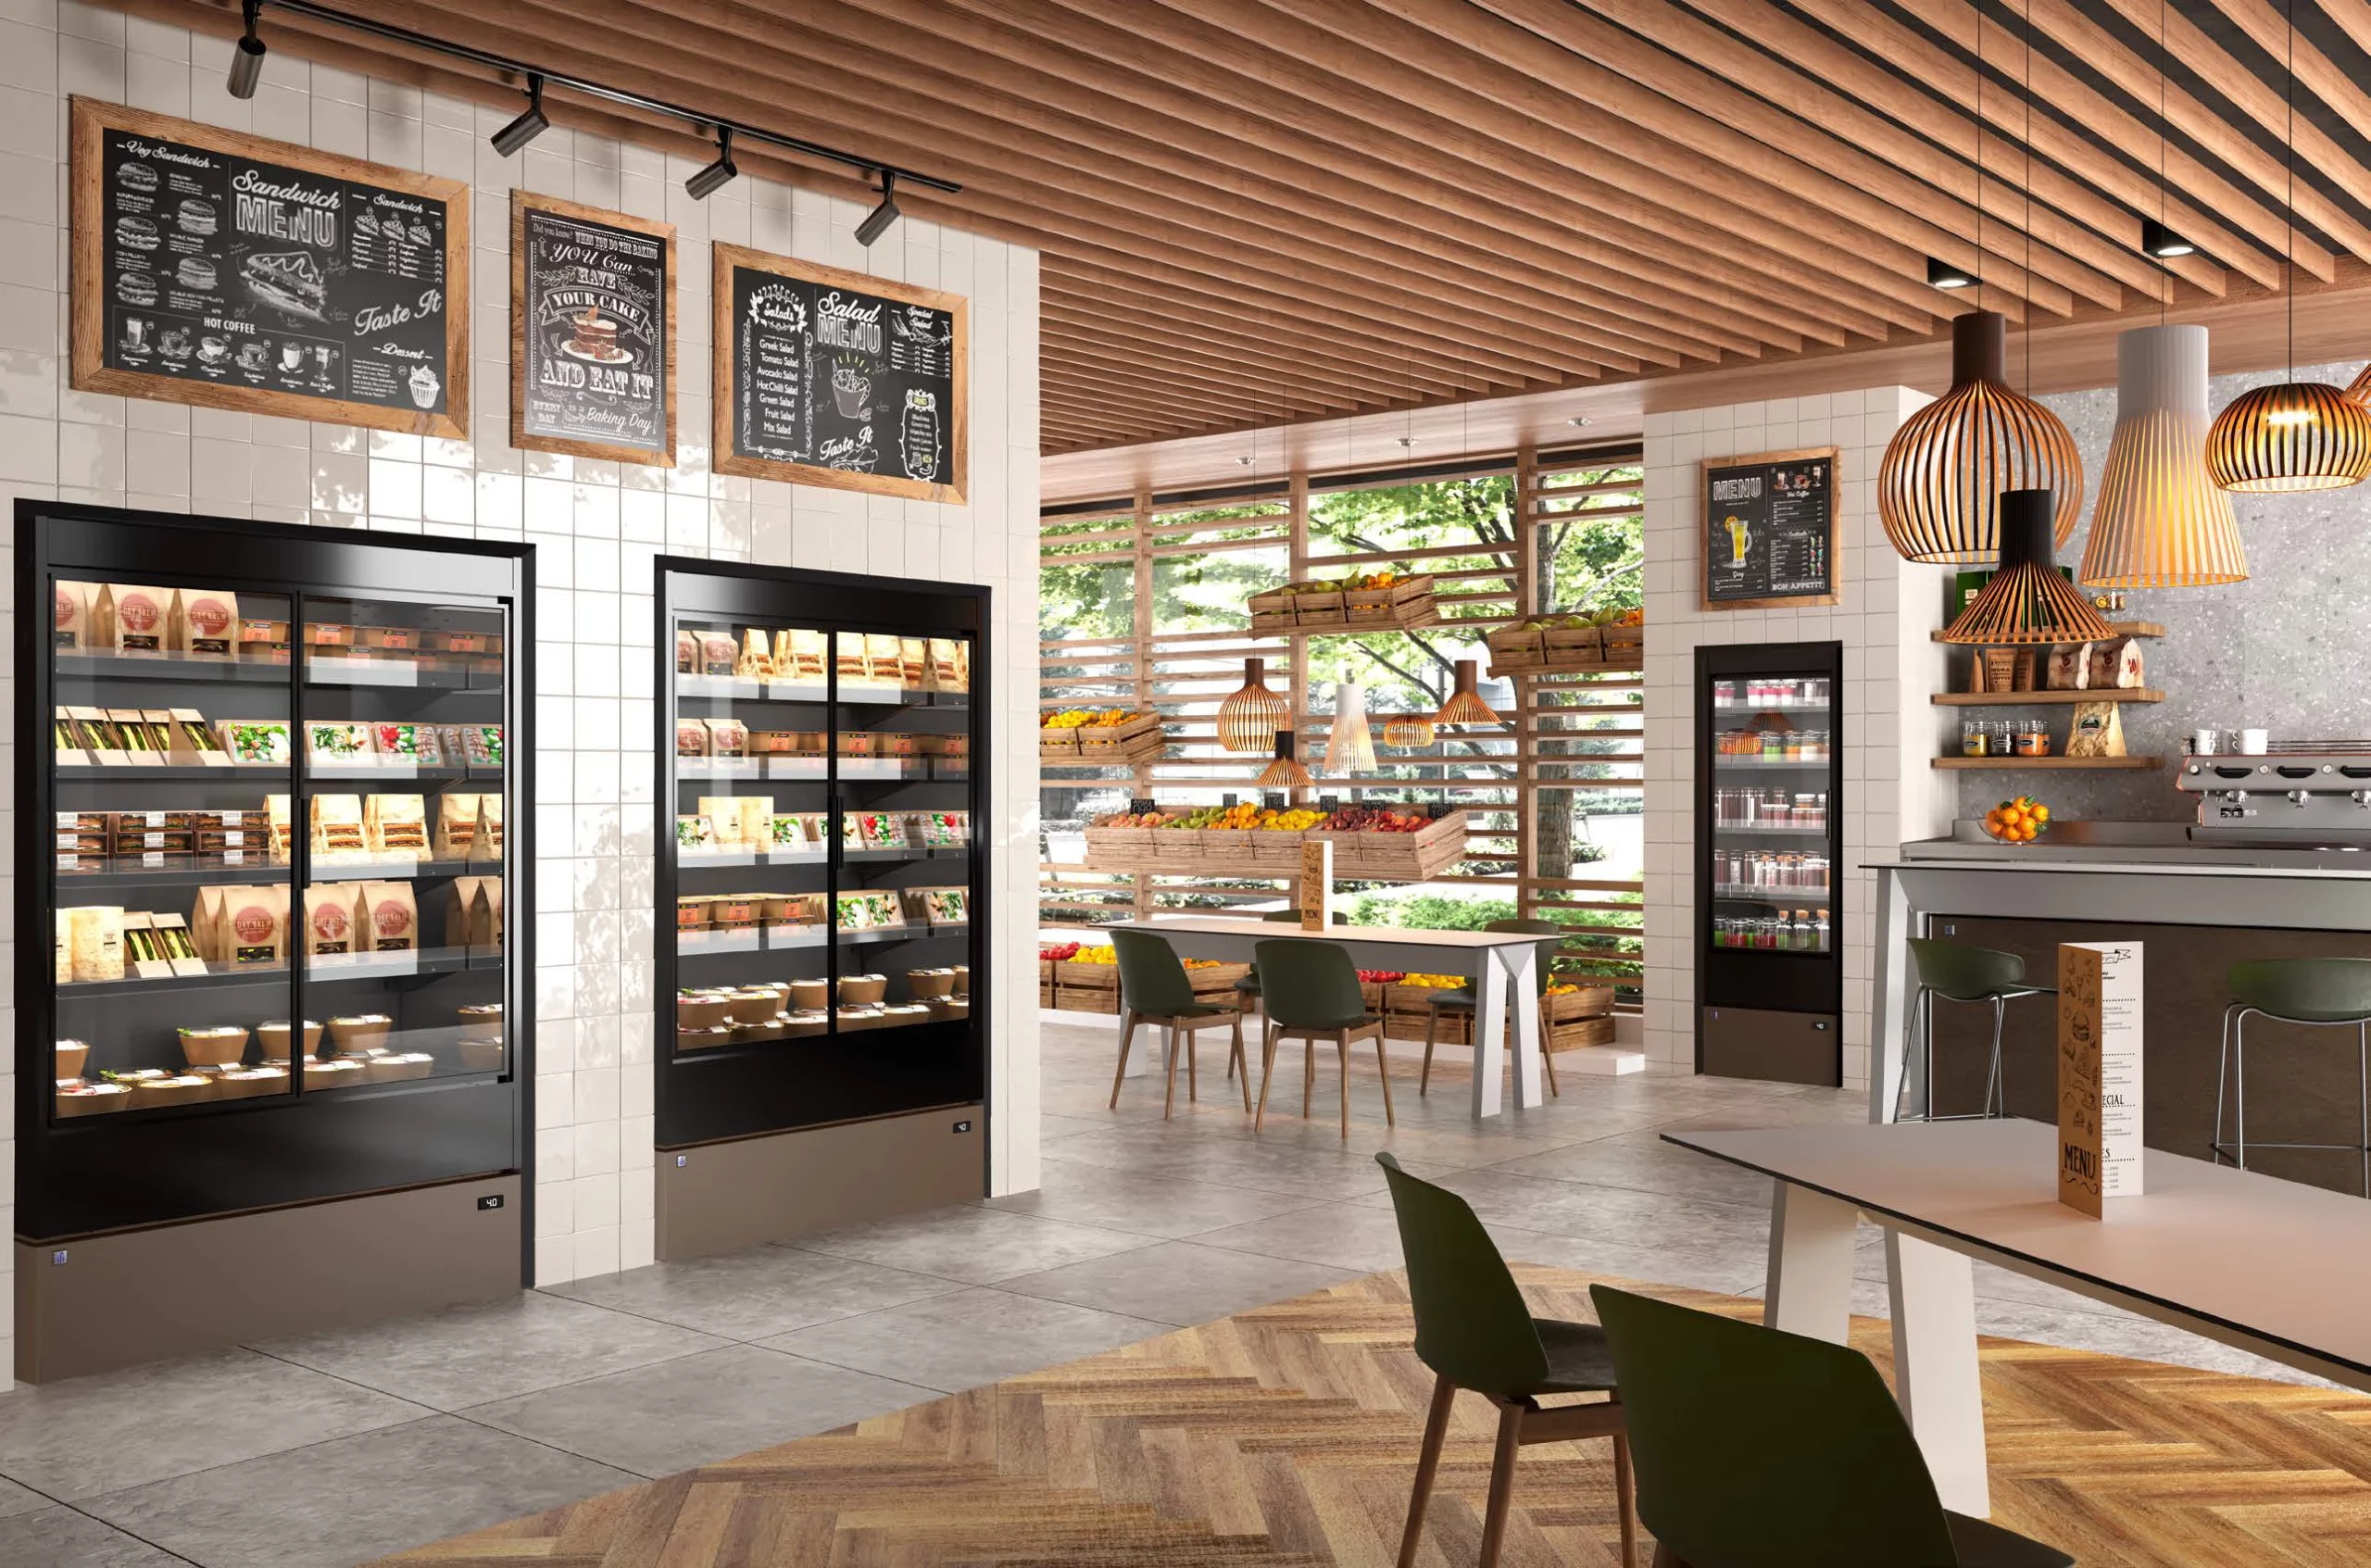 Transform your food service vision into captivating spaces with Baluna's expert design services. Specializing in creating environments that enchant guests and streamline operations, we bring over 35 years of experience to every project.